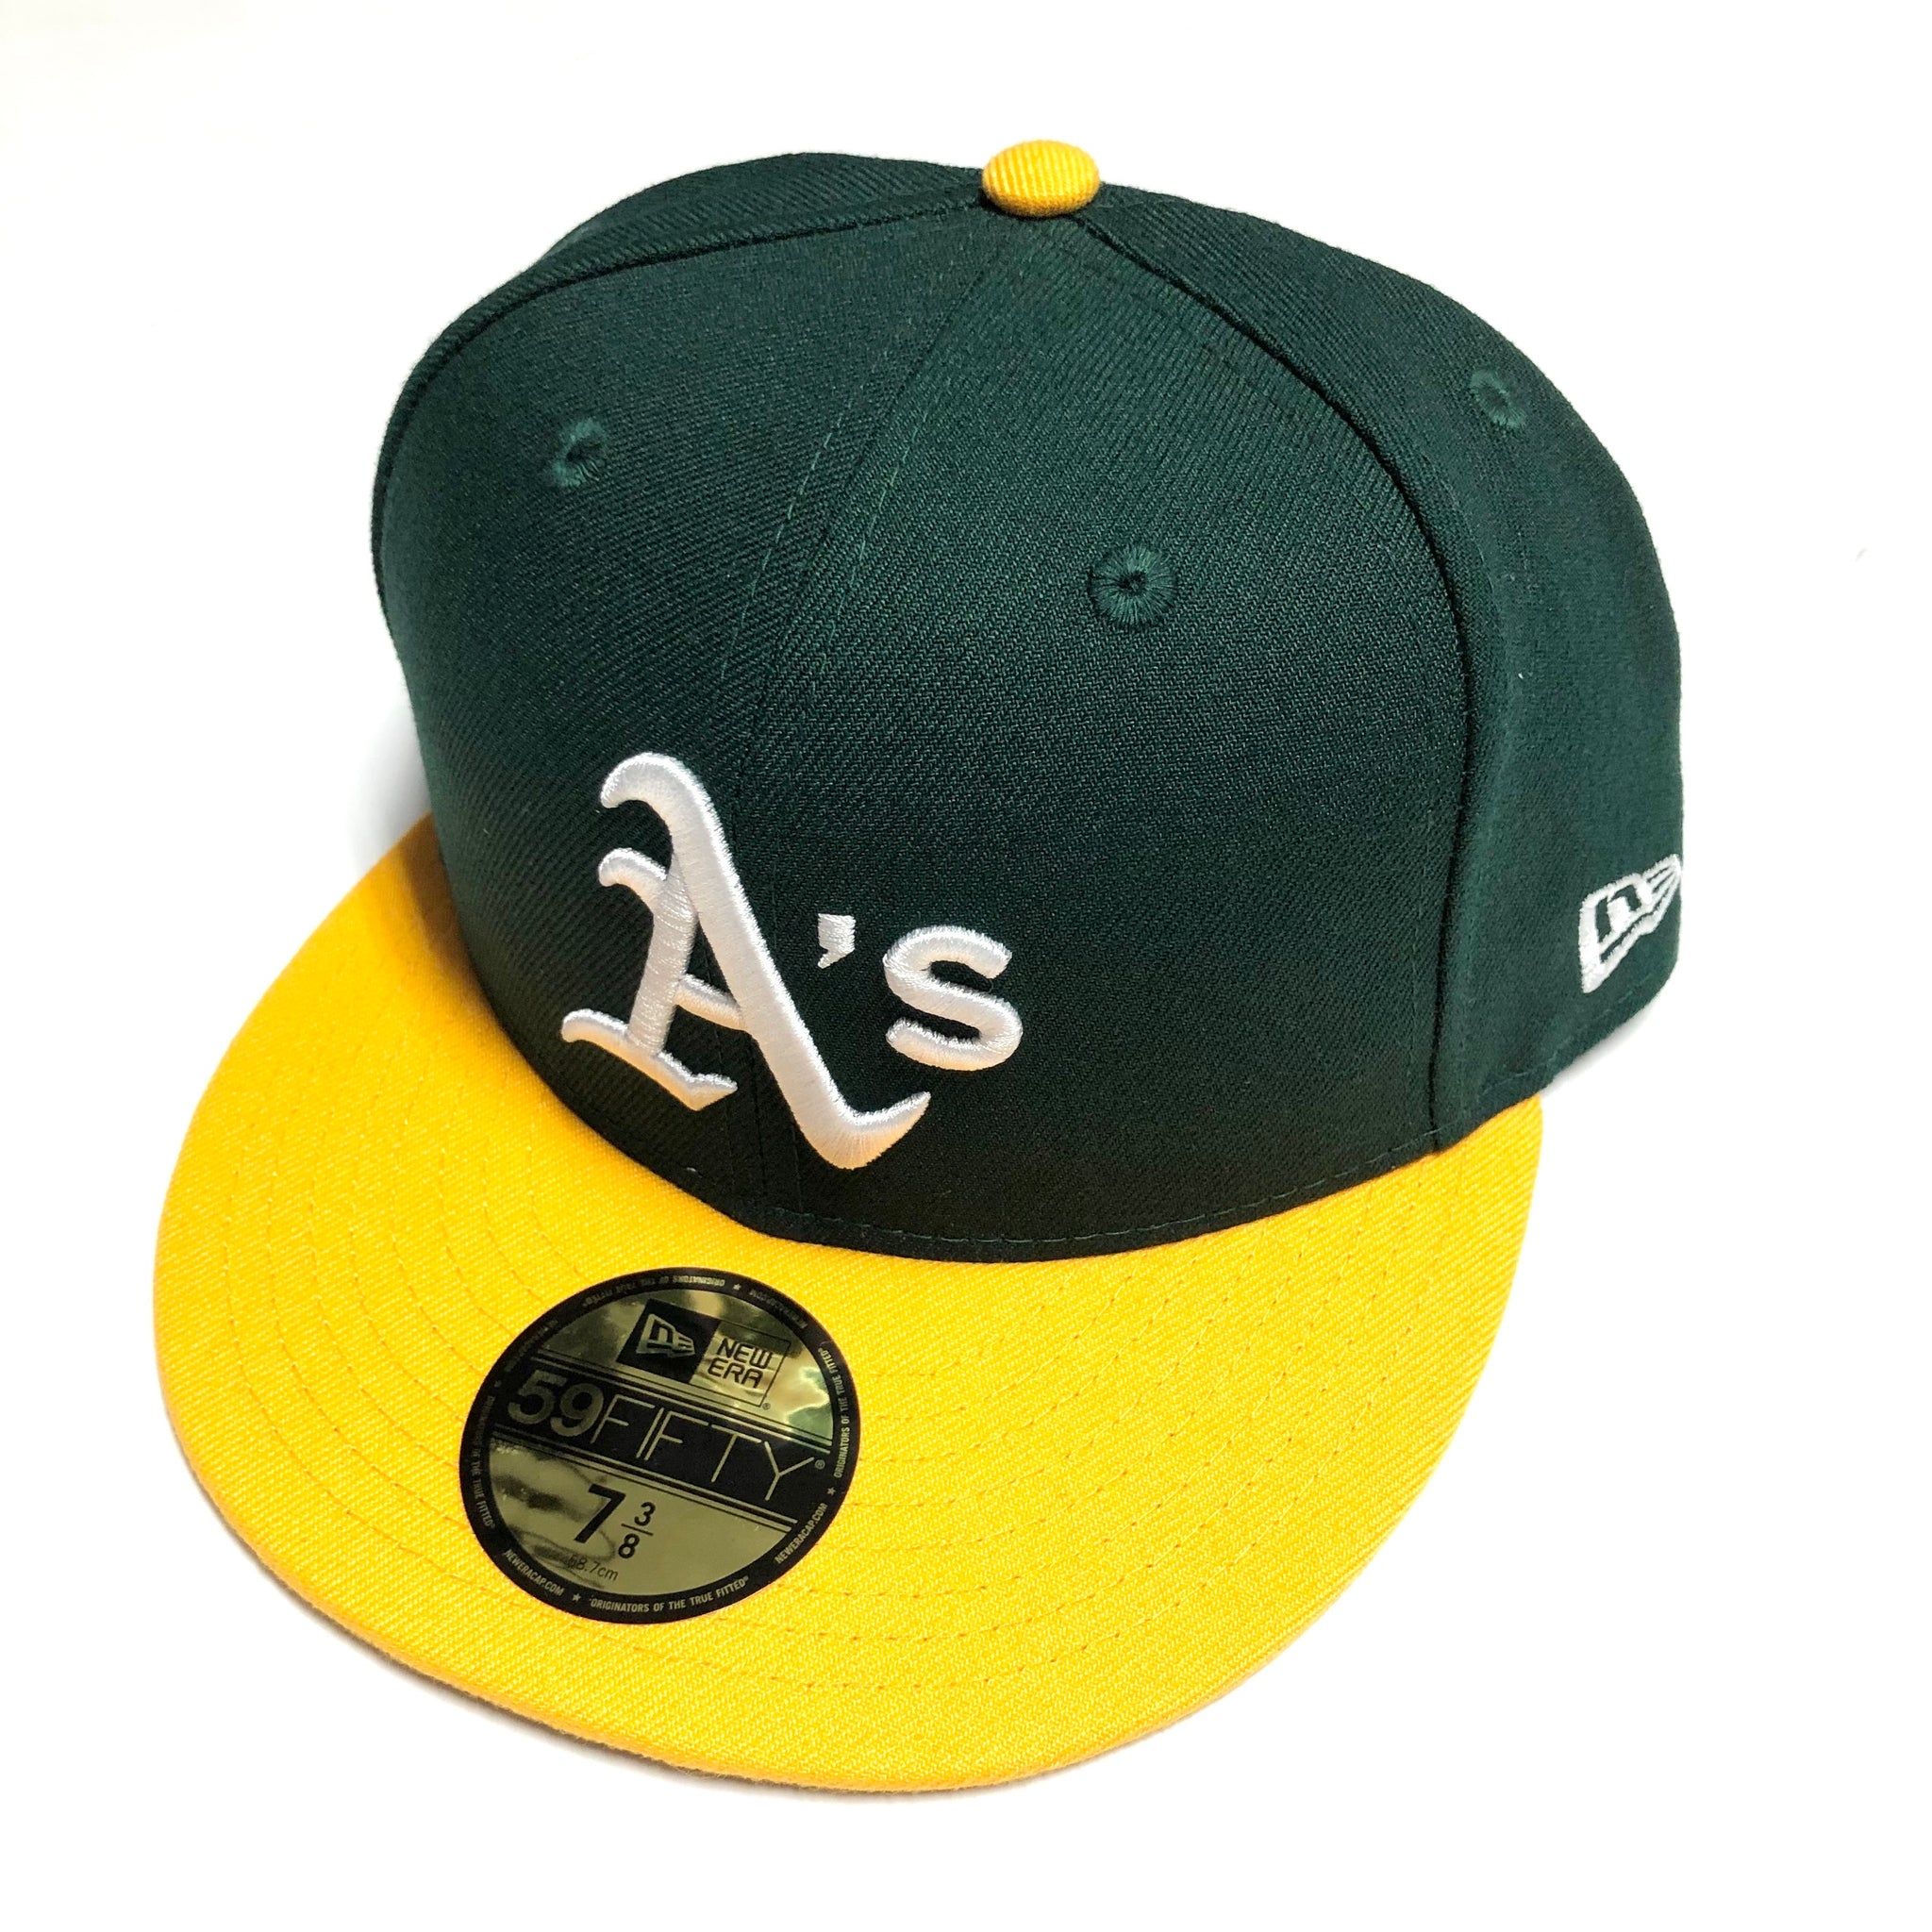 NEW ERA BASIC ON FIELD OAKLAND A’S FITTED HAT